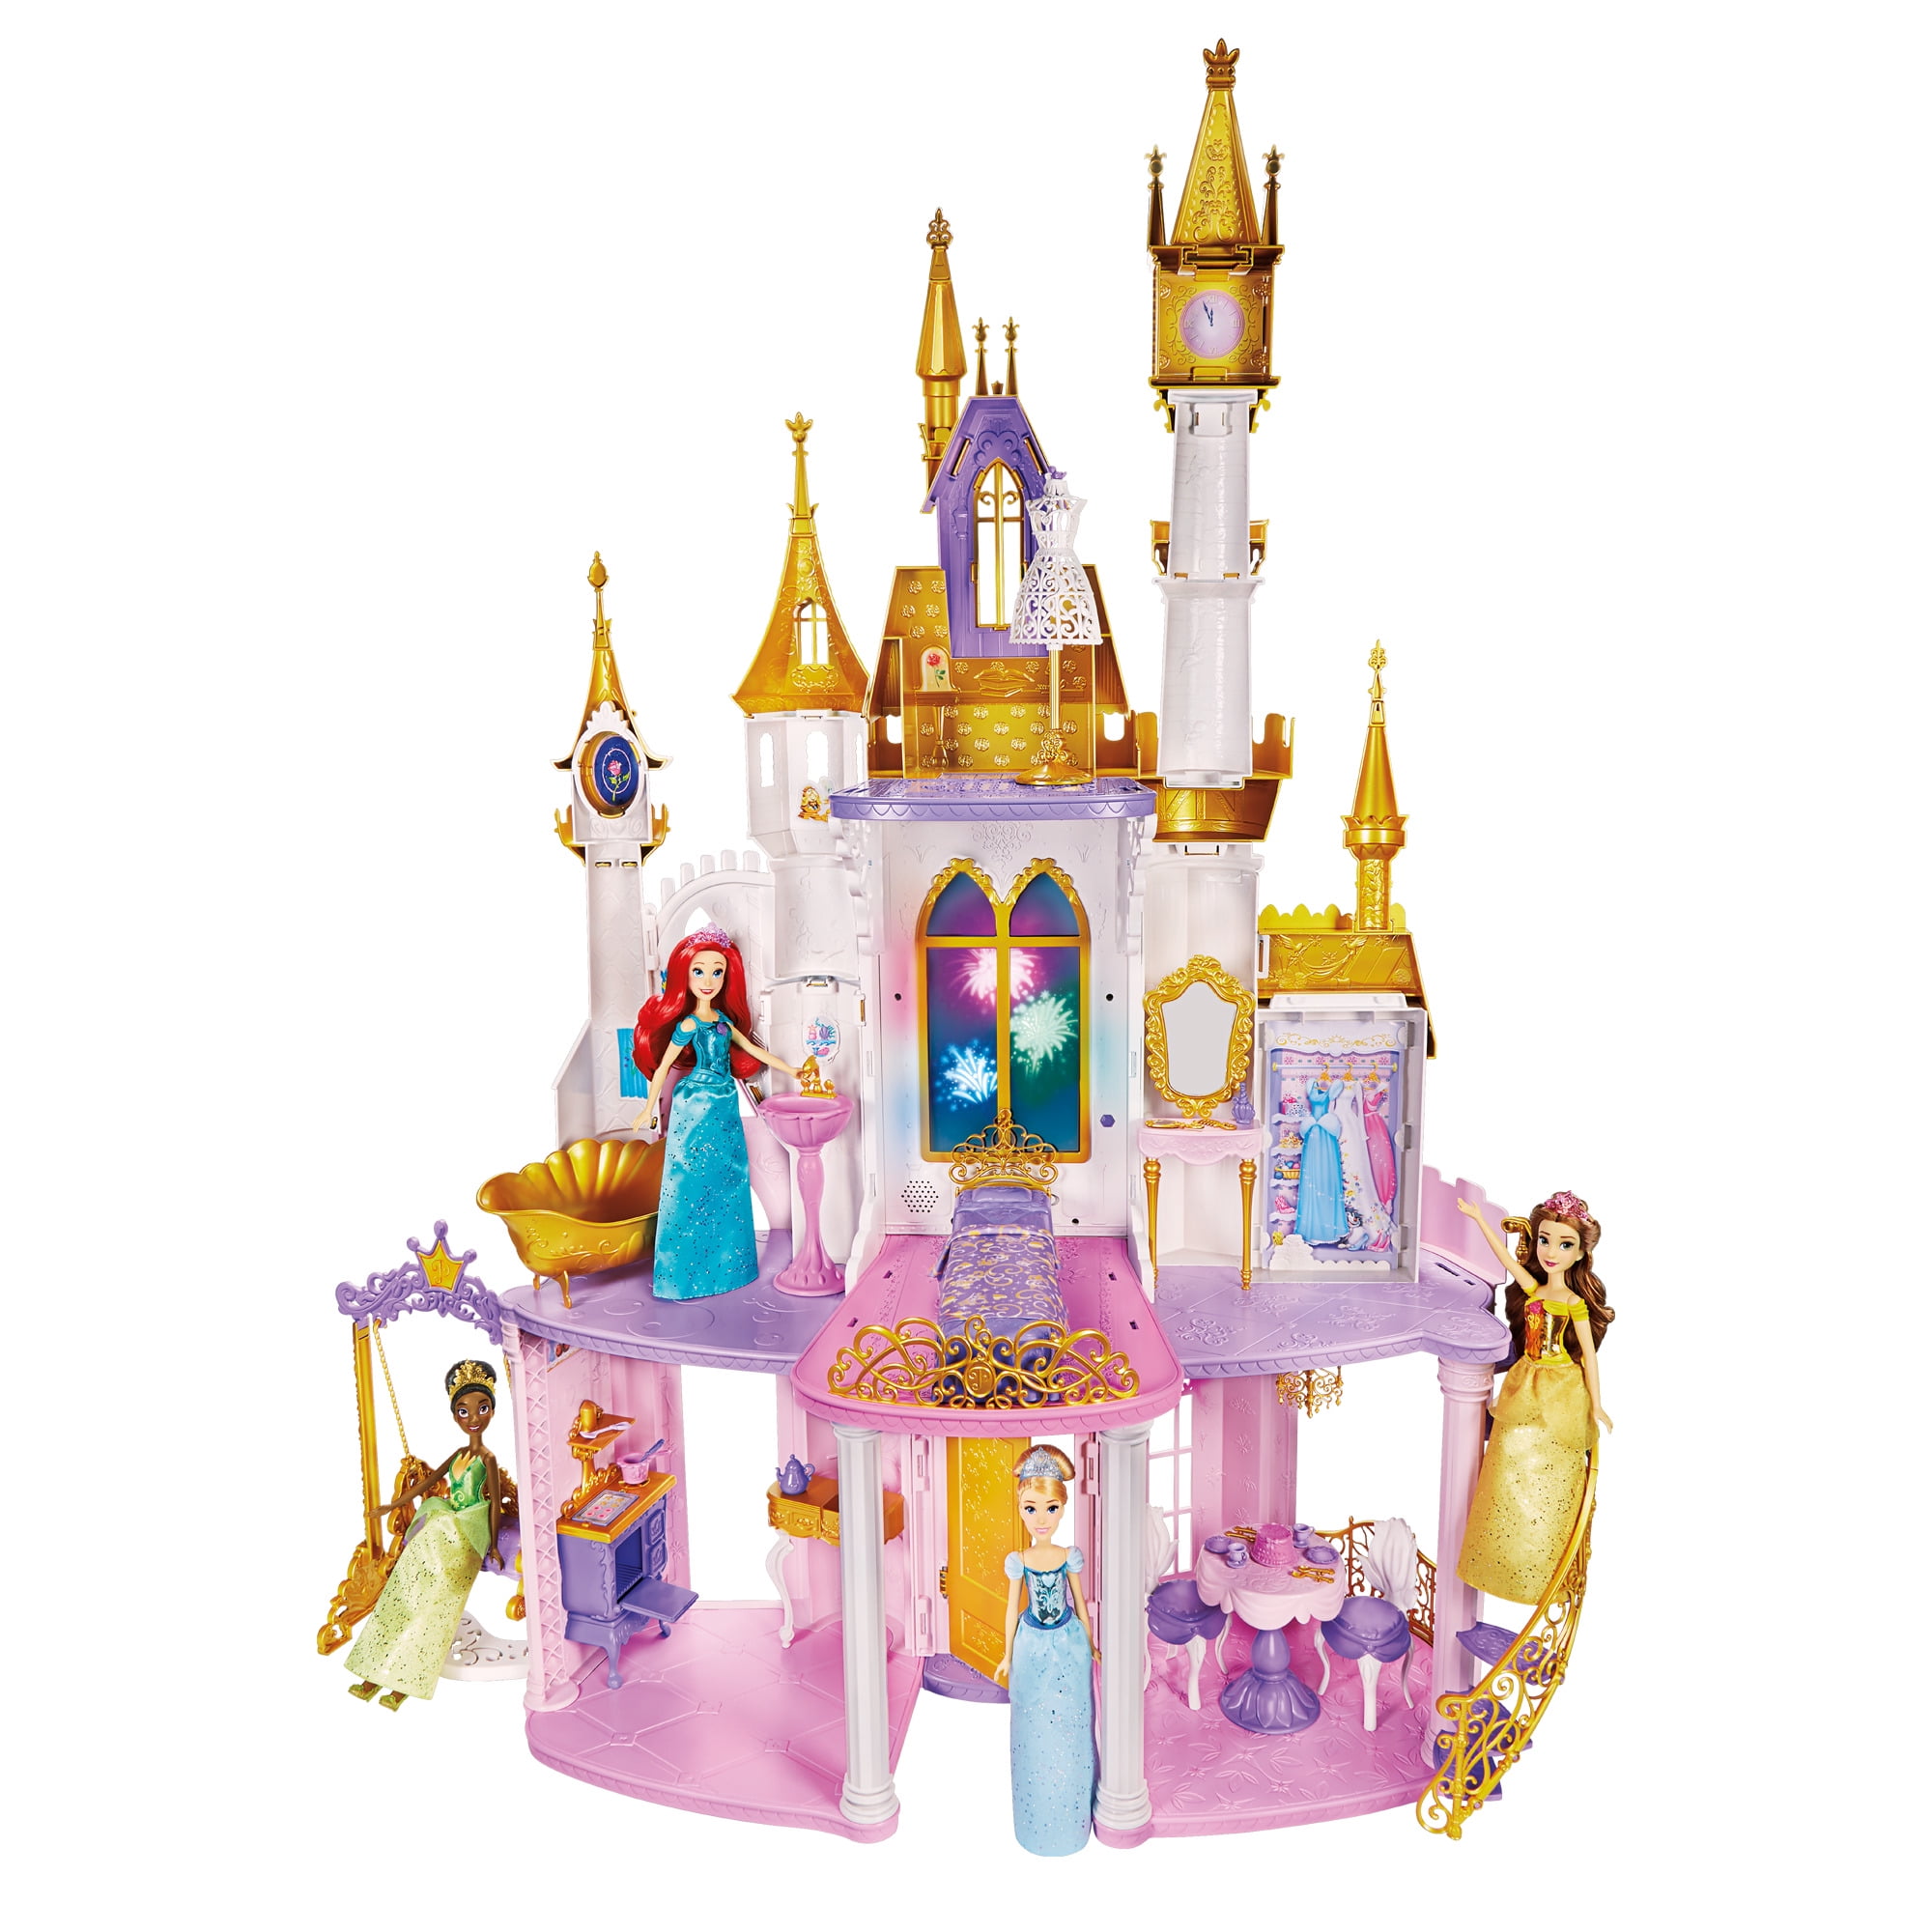 Pink Princess Musical Castle Play Set Light Music For Girls Toy Great Gift Idea 